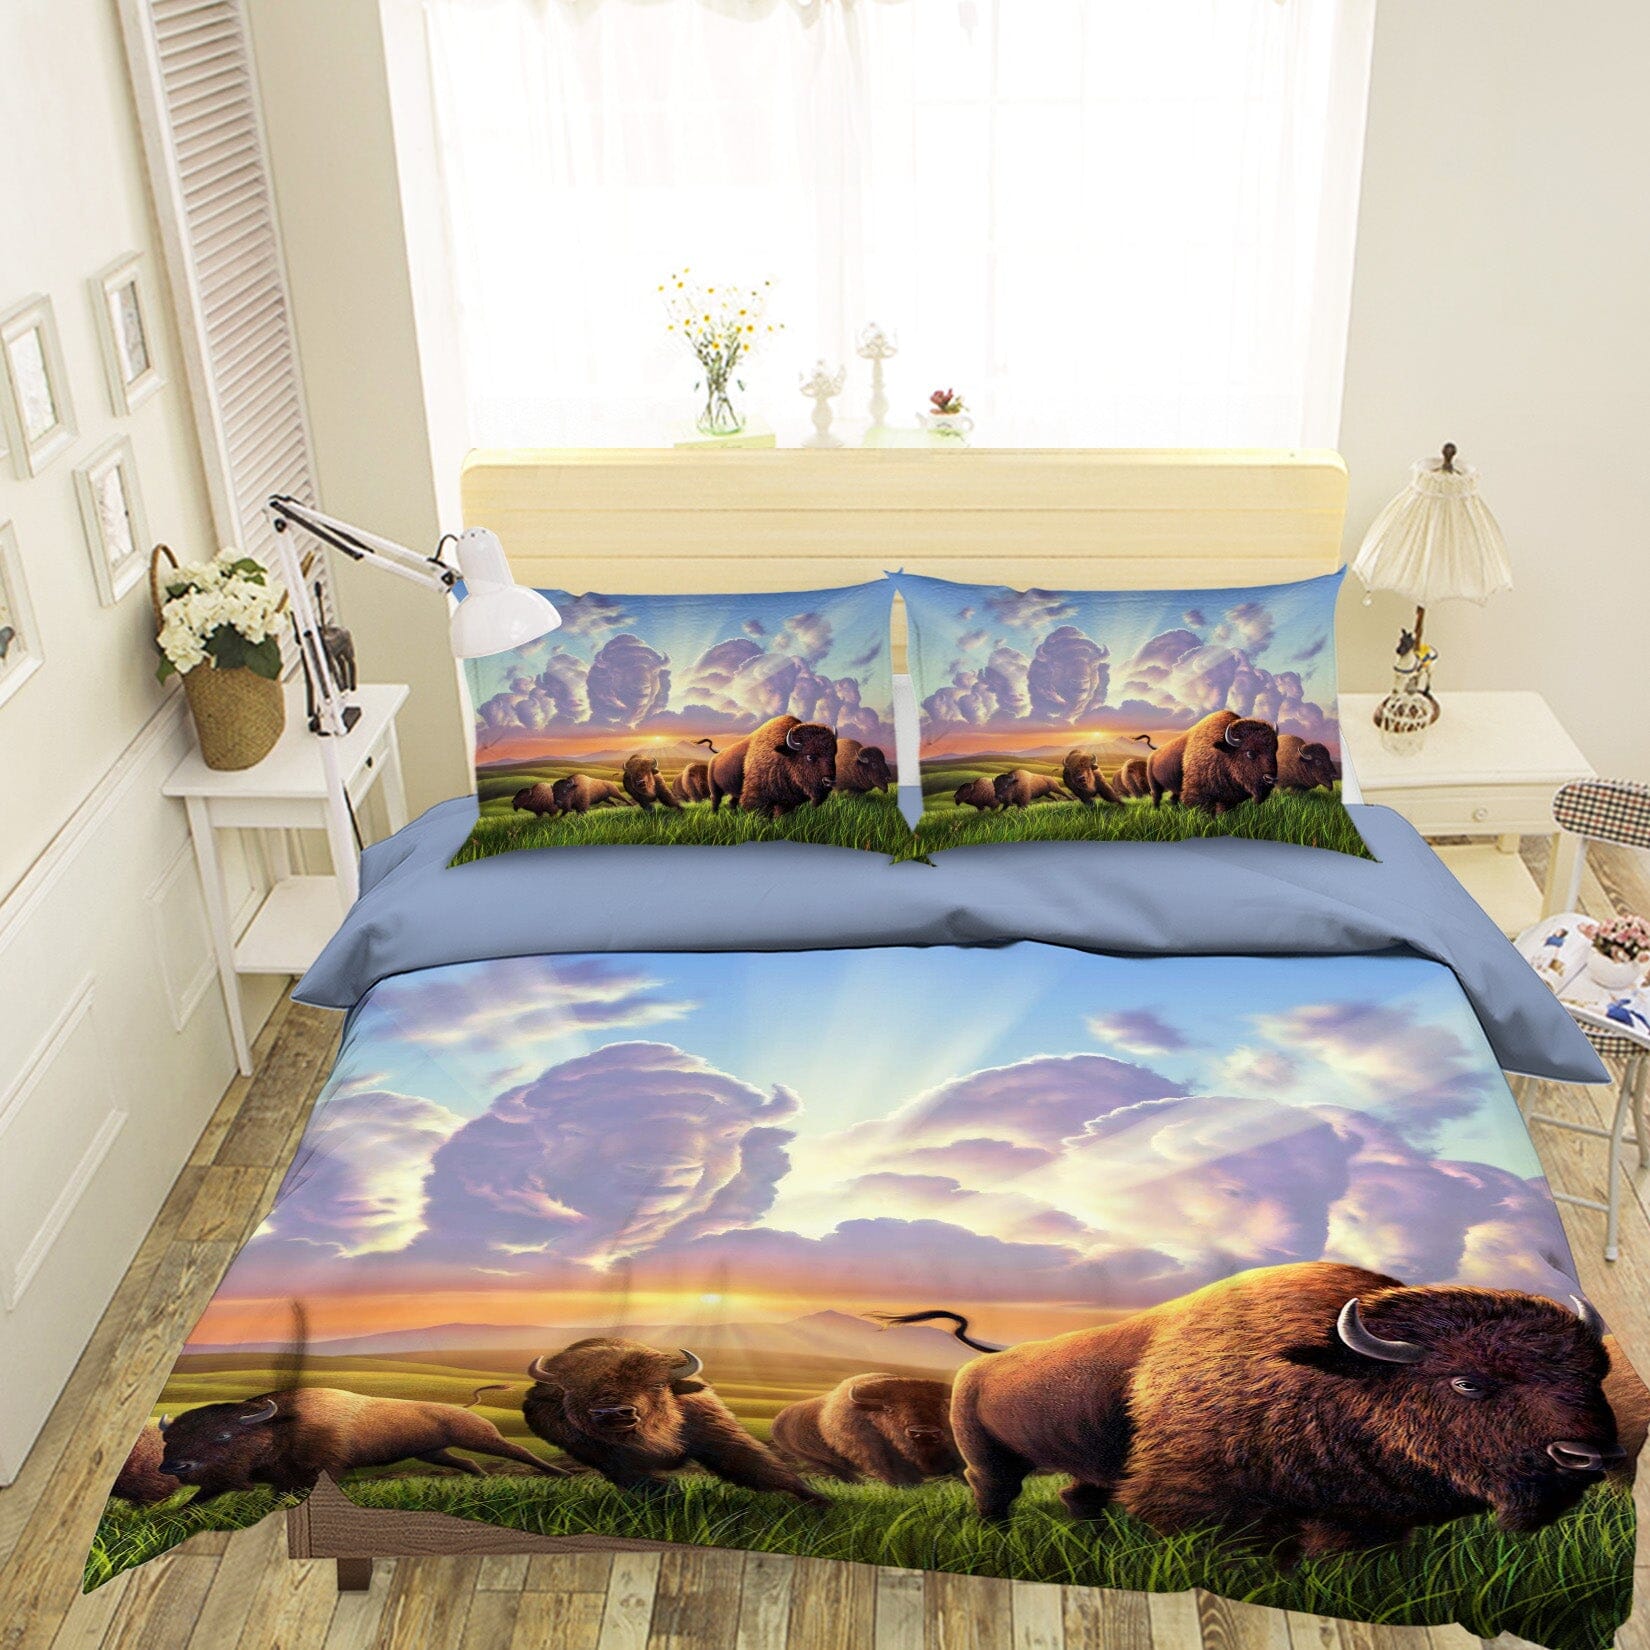 3D Stampede 2133 Jerry LoFaro bedding Bed Pillowcases Quilt Quiet Covers AJ Creativity Home 